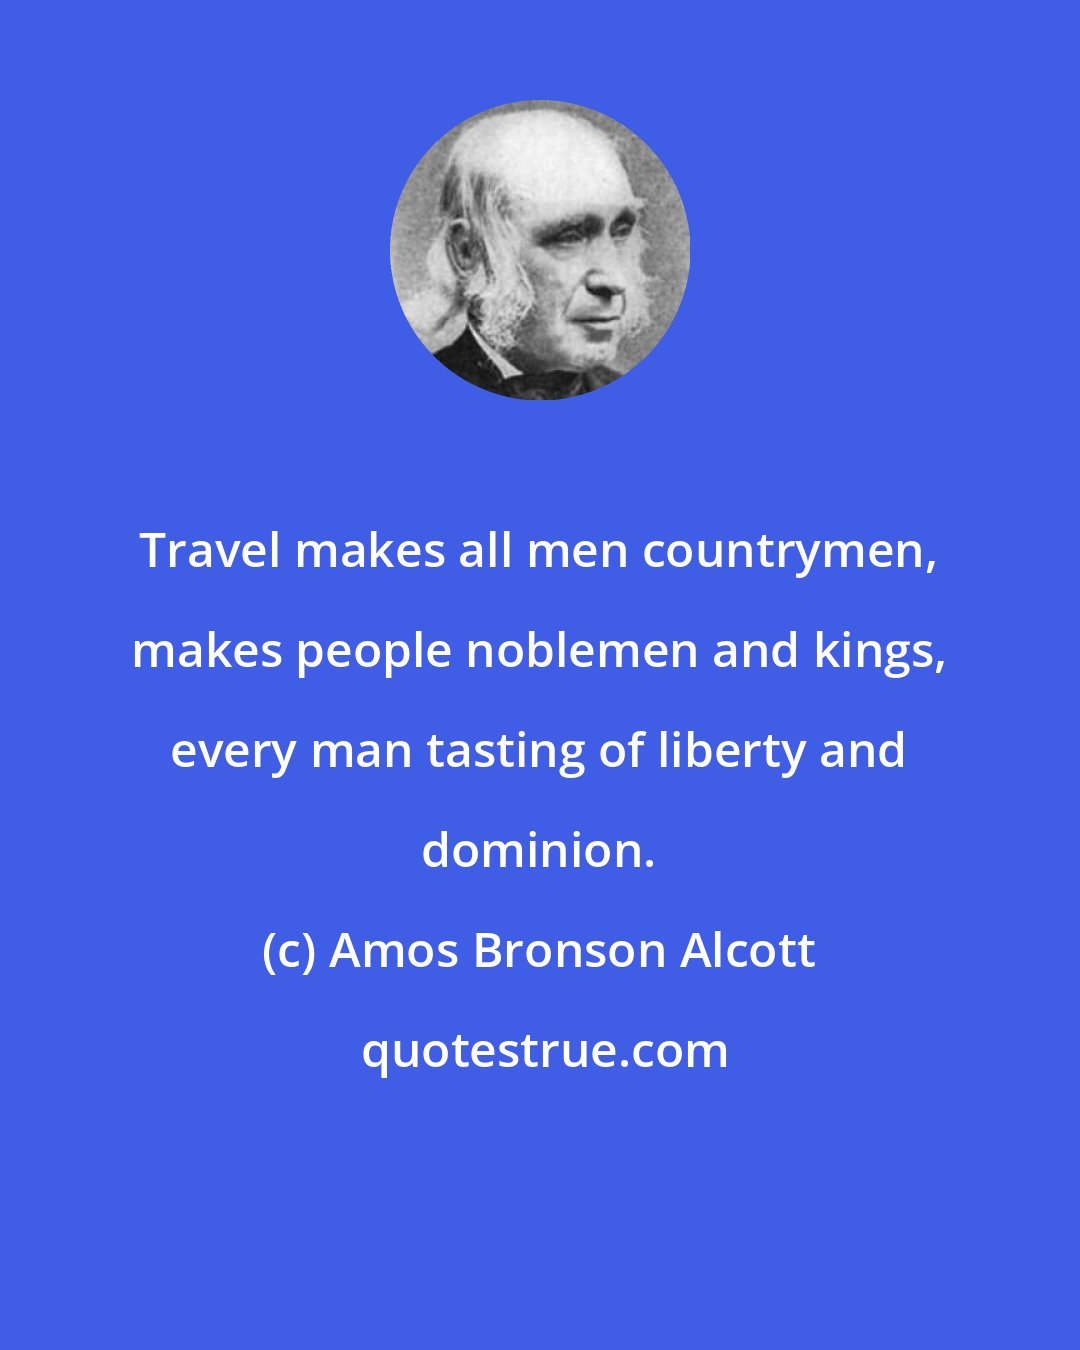 Amos Bronson Alcott: Travel makes all men countrymen, makes people noblemen and kings, every man tasting of liberty and dominion.